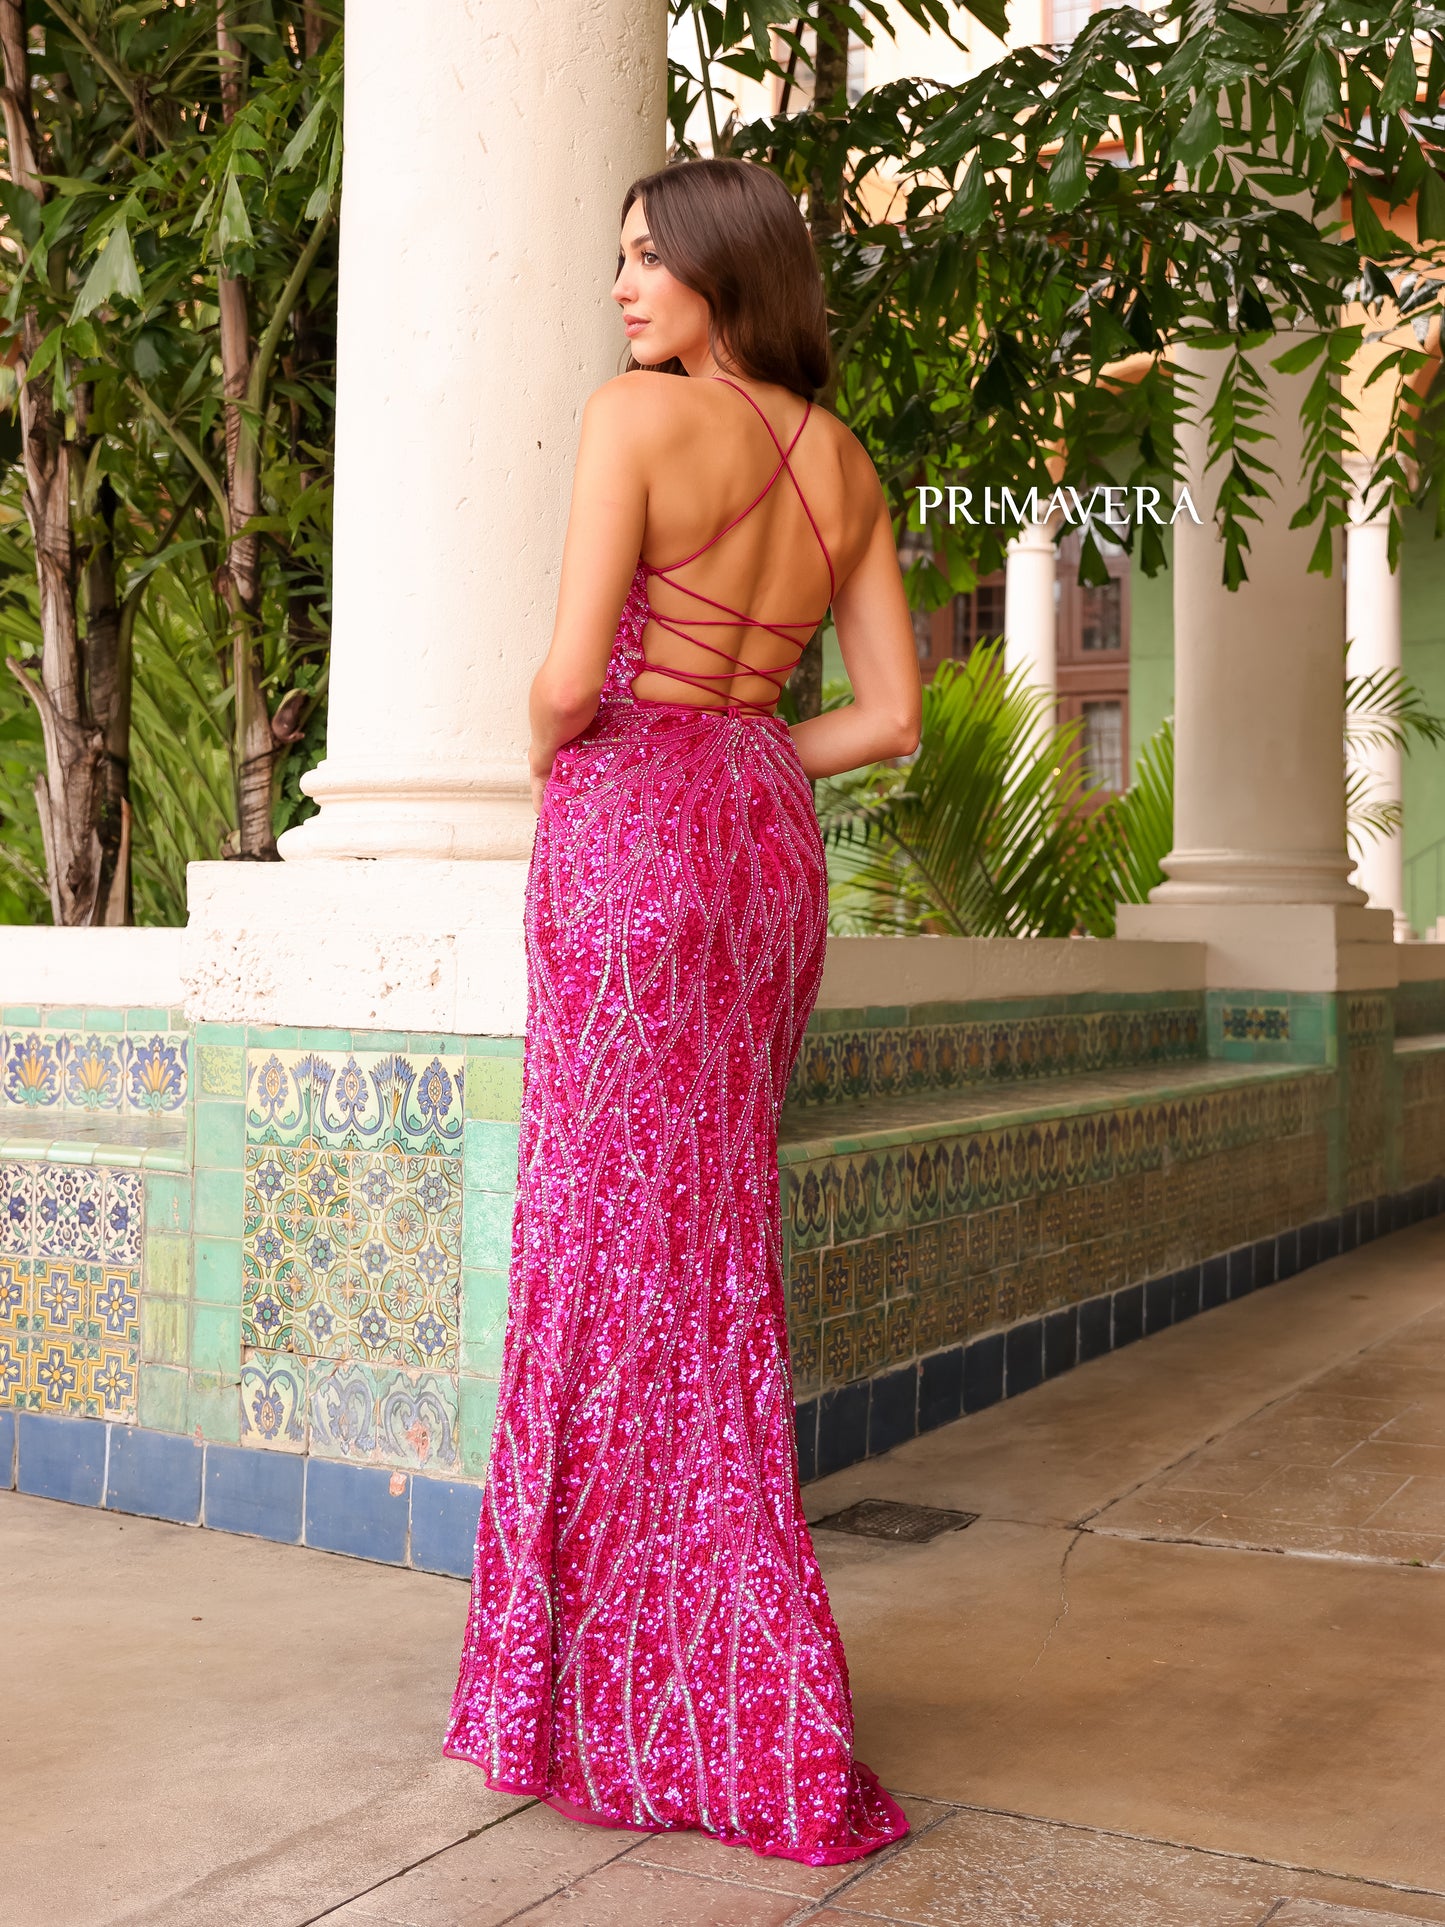 Primavera Couture 3959 Prom Dress Long Beaded Gown. This Gown has a beautiful design all over. Primavera Couture 3959 Sequin Scoop neck Prom Dress Backless Corset Slit Formal Gown  Size- 14  Colors- Fuchsia